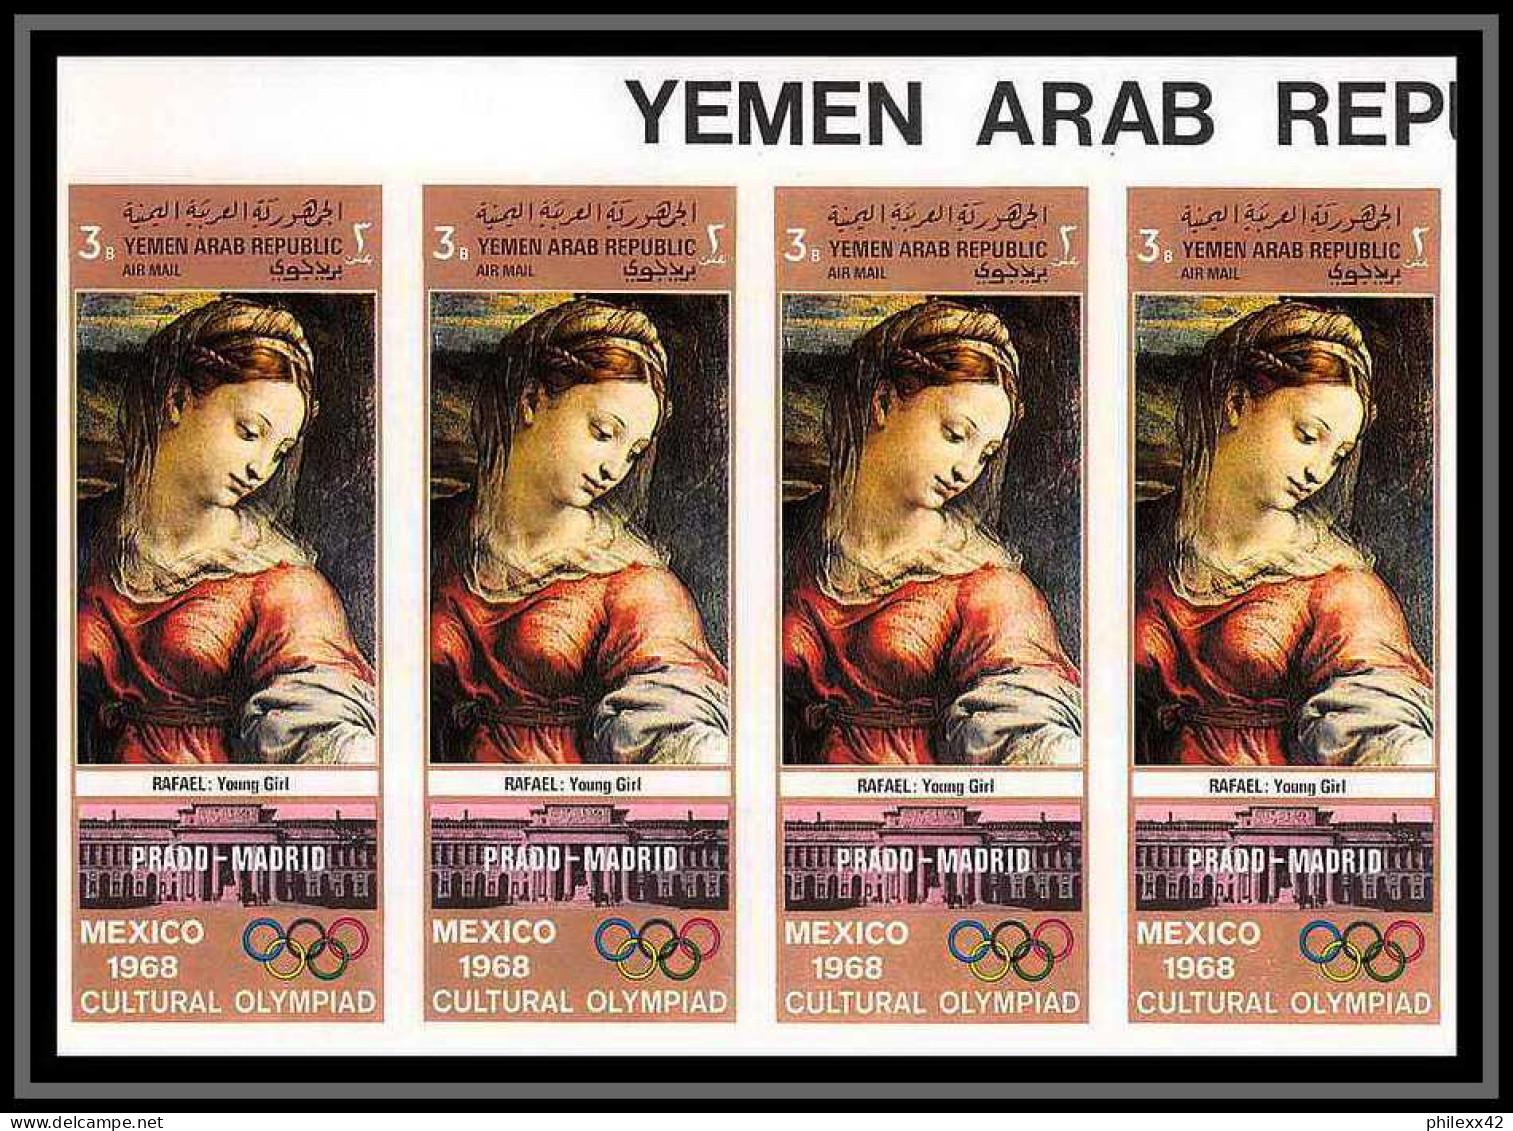 nord Yemen YAR - 3509/ N° 896/901 jeux olympiques (olympic games) mexico 1968 tableaux paintings non dentelé bande 4